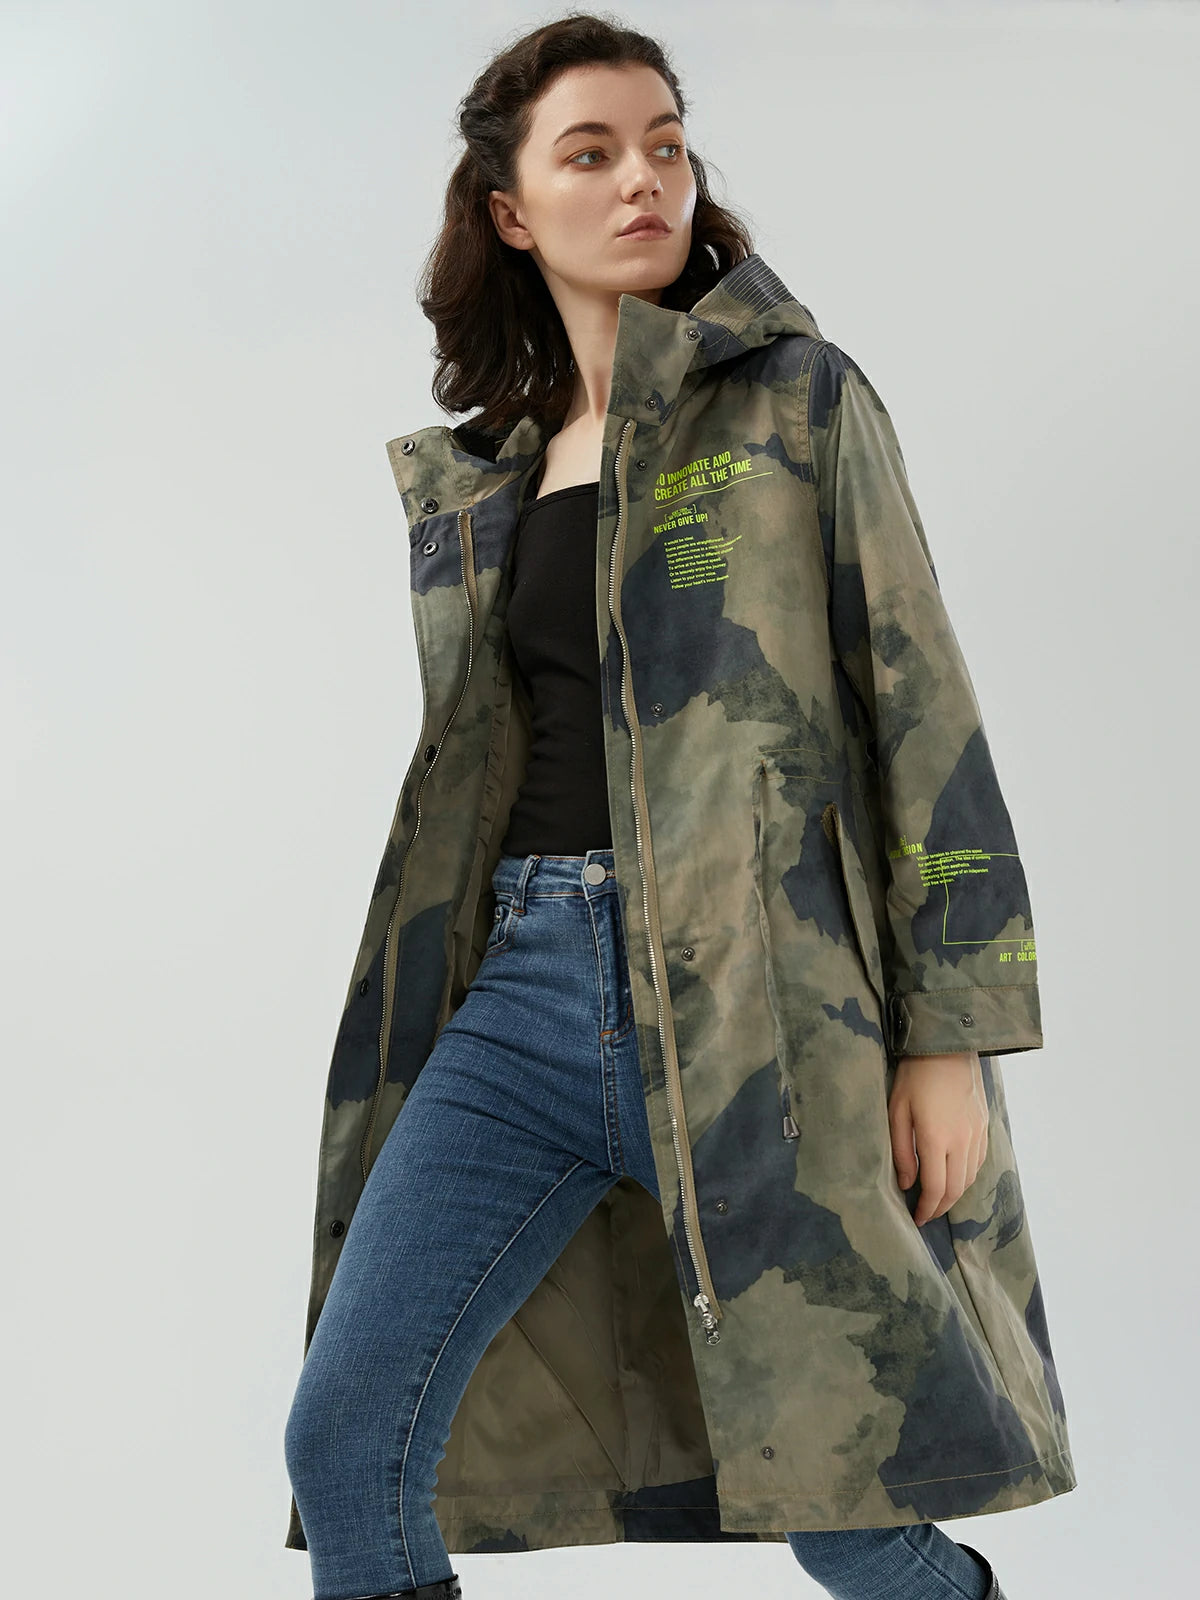 Casual-chic trench coat with a waist-cinched design and eye-catching camouflage print